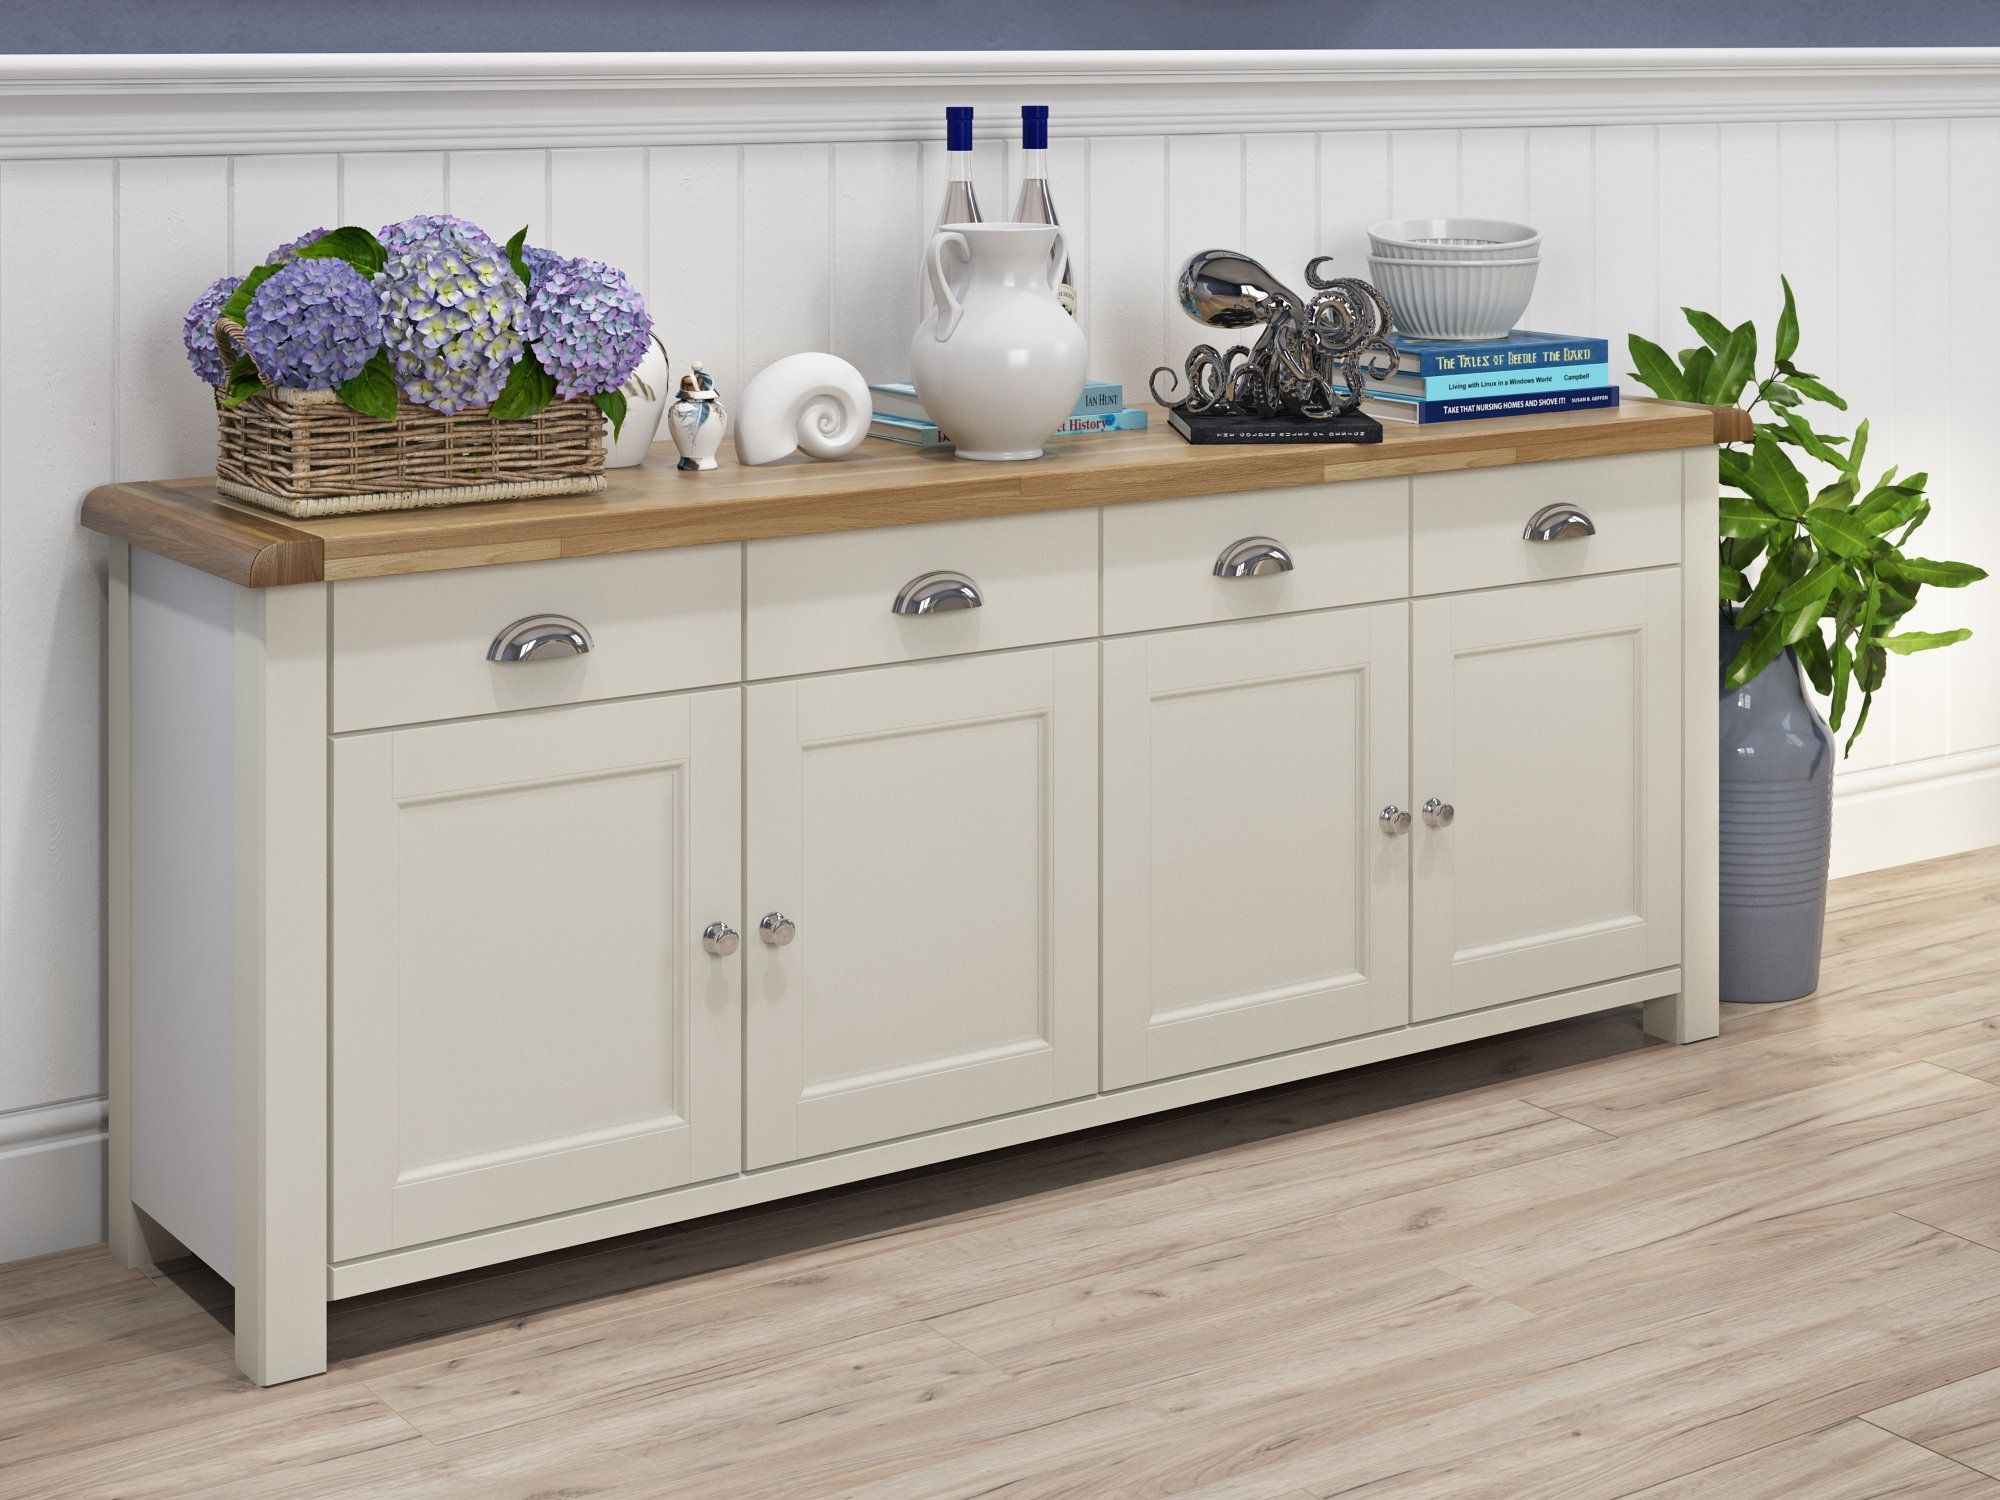 Beachcrest Home Sanford Sideboard & Reviews | Wayfair.co.uk Throughout Most Up To Date 4 Door/4 Drawer Metal Inserts Sideboards (Photo 19 of 20)